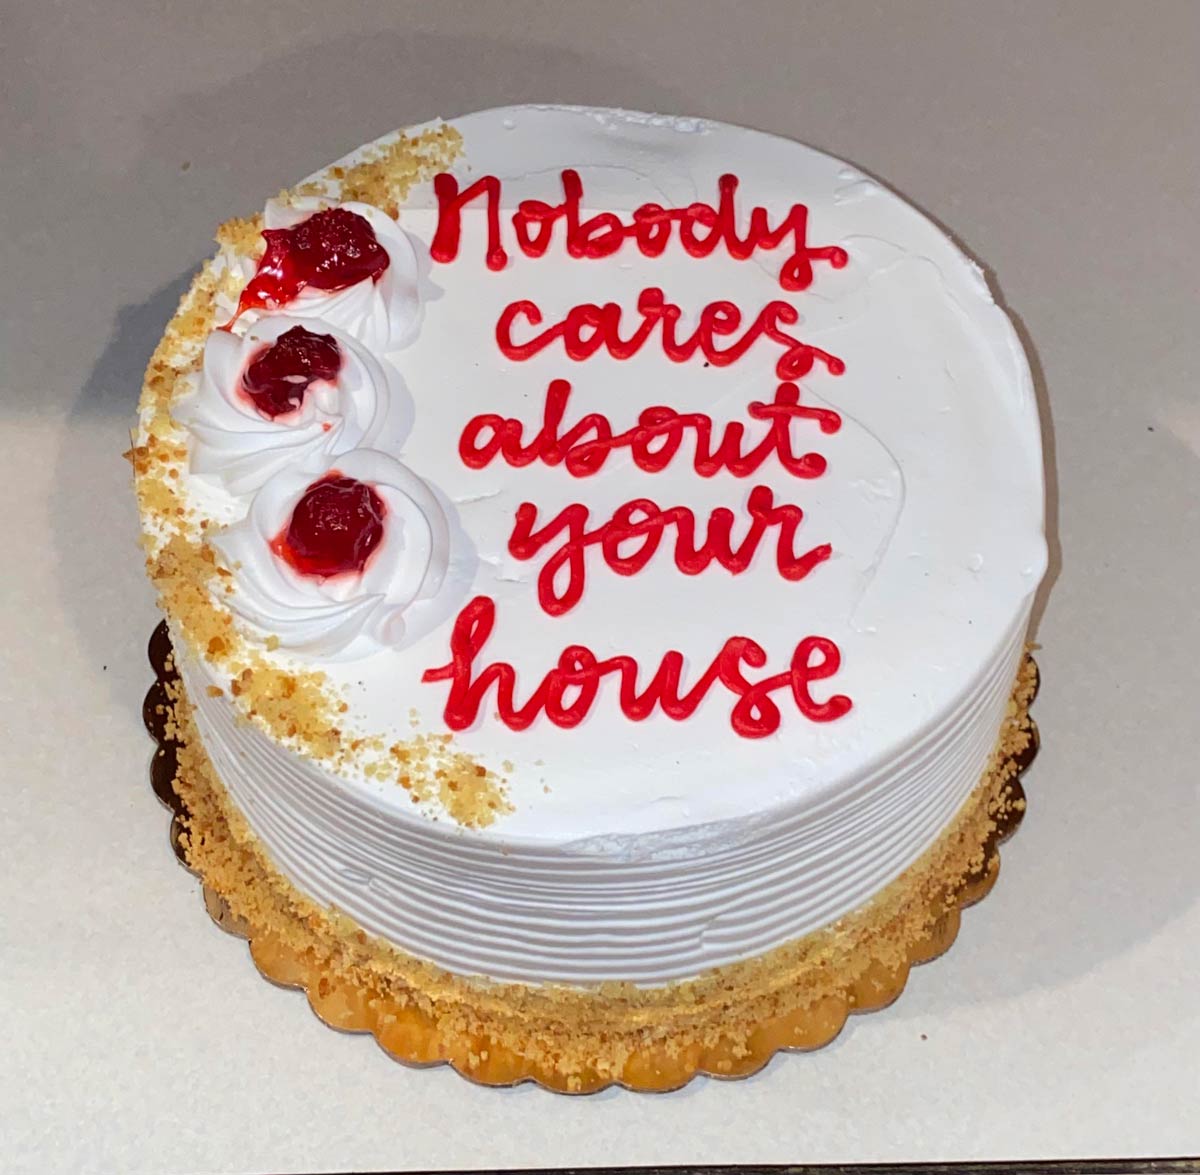 My brother bought his first house this year and won’t shut up about it. Got him this cake for his birthday this year